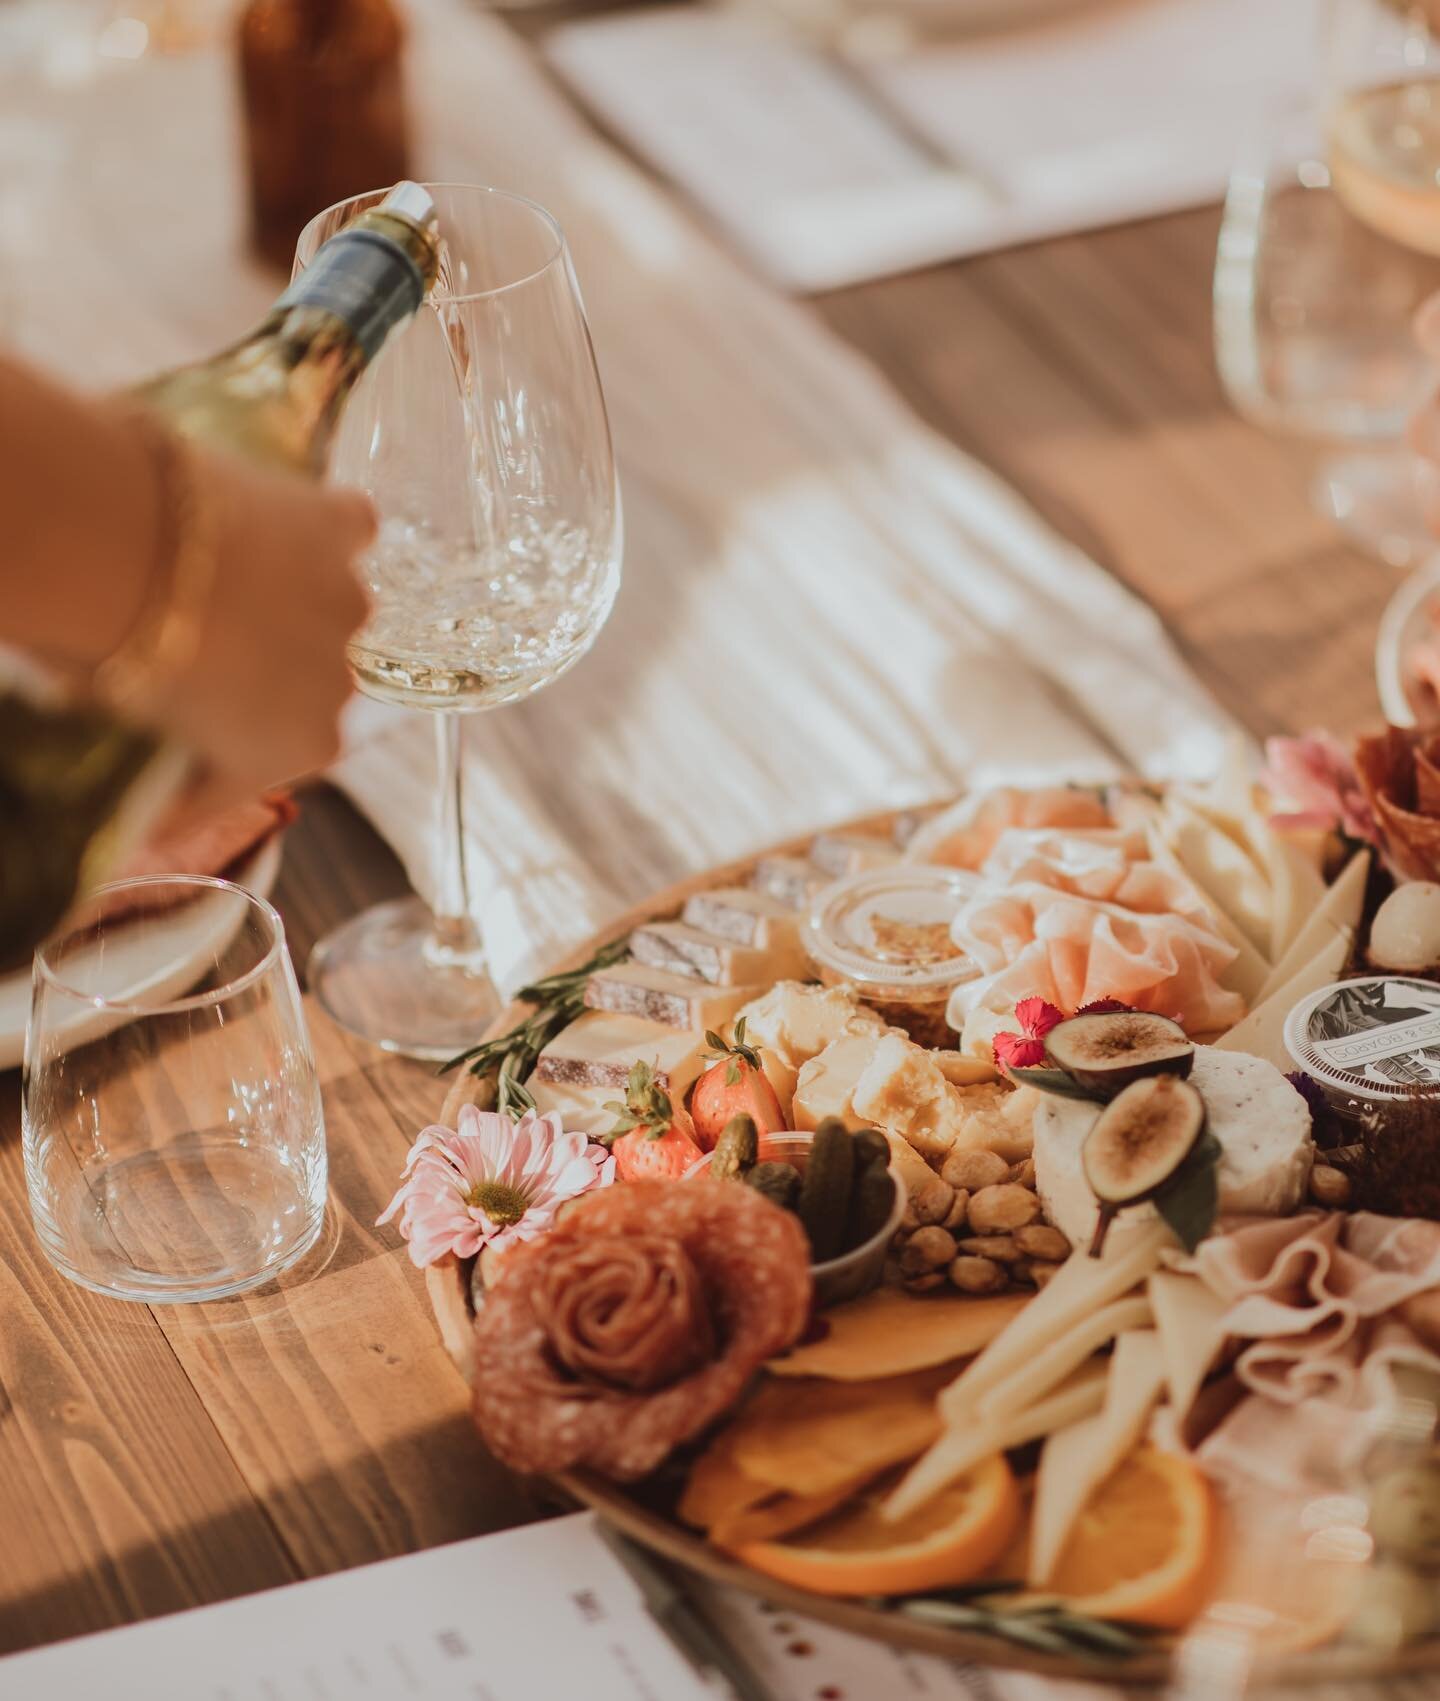 #GIVEAWAY ALERT! 

@gotyourbash and @malbecbay have teamed up for something really fun ✨ Celebrate the bride-to-be with our Tampa Bay Bachelorette Wine Tasting! Enter now for a chance to win a deliciously fun night with your gals 🍾 

WHAT&rsquo;S IN